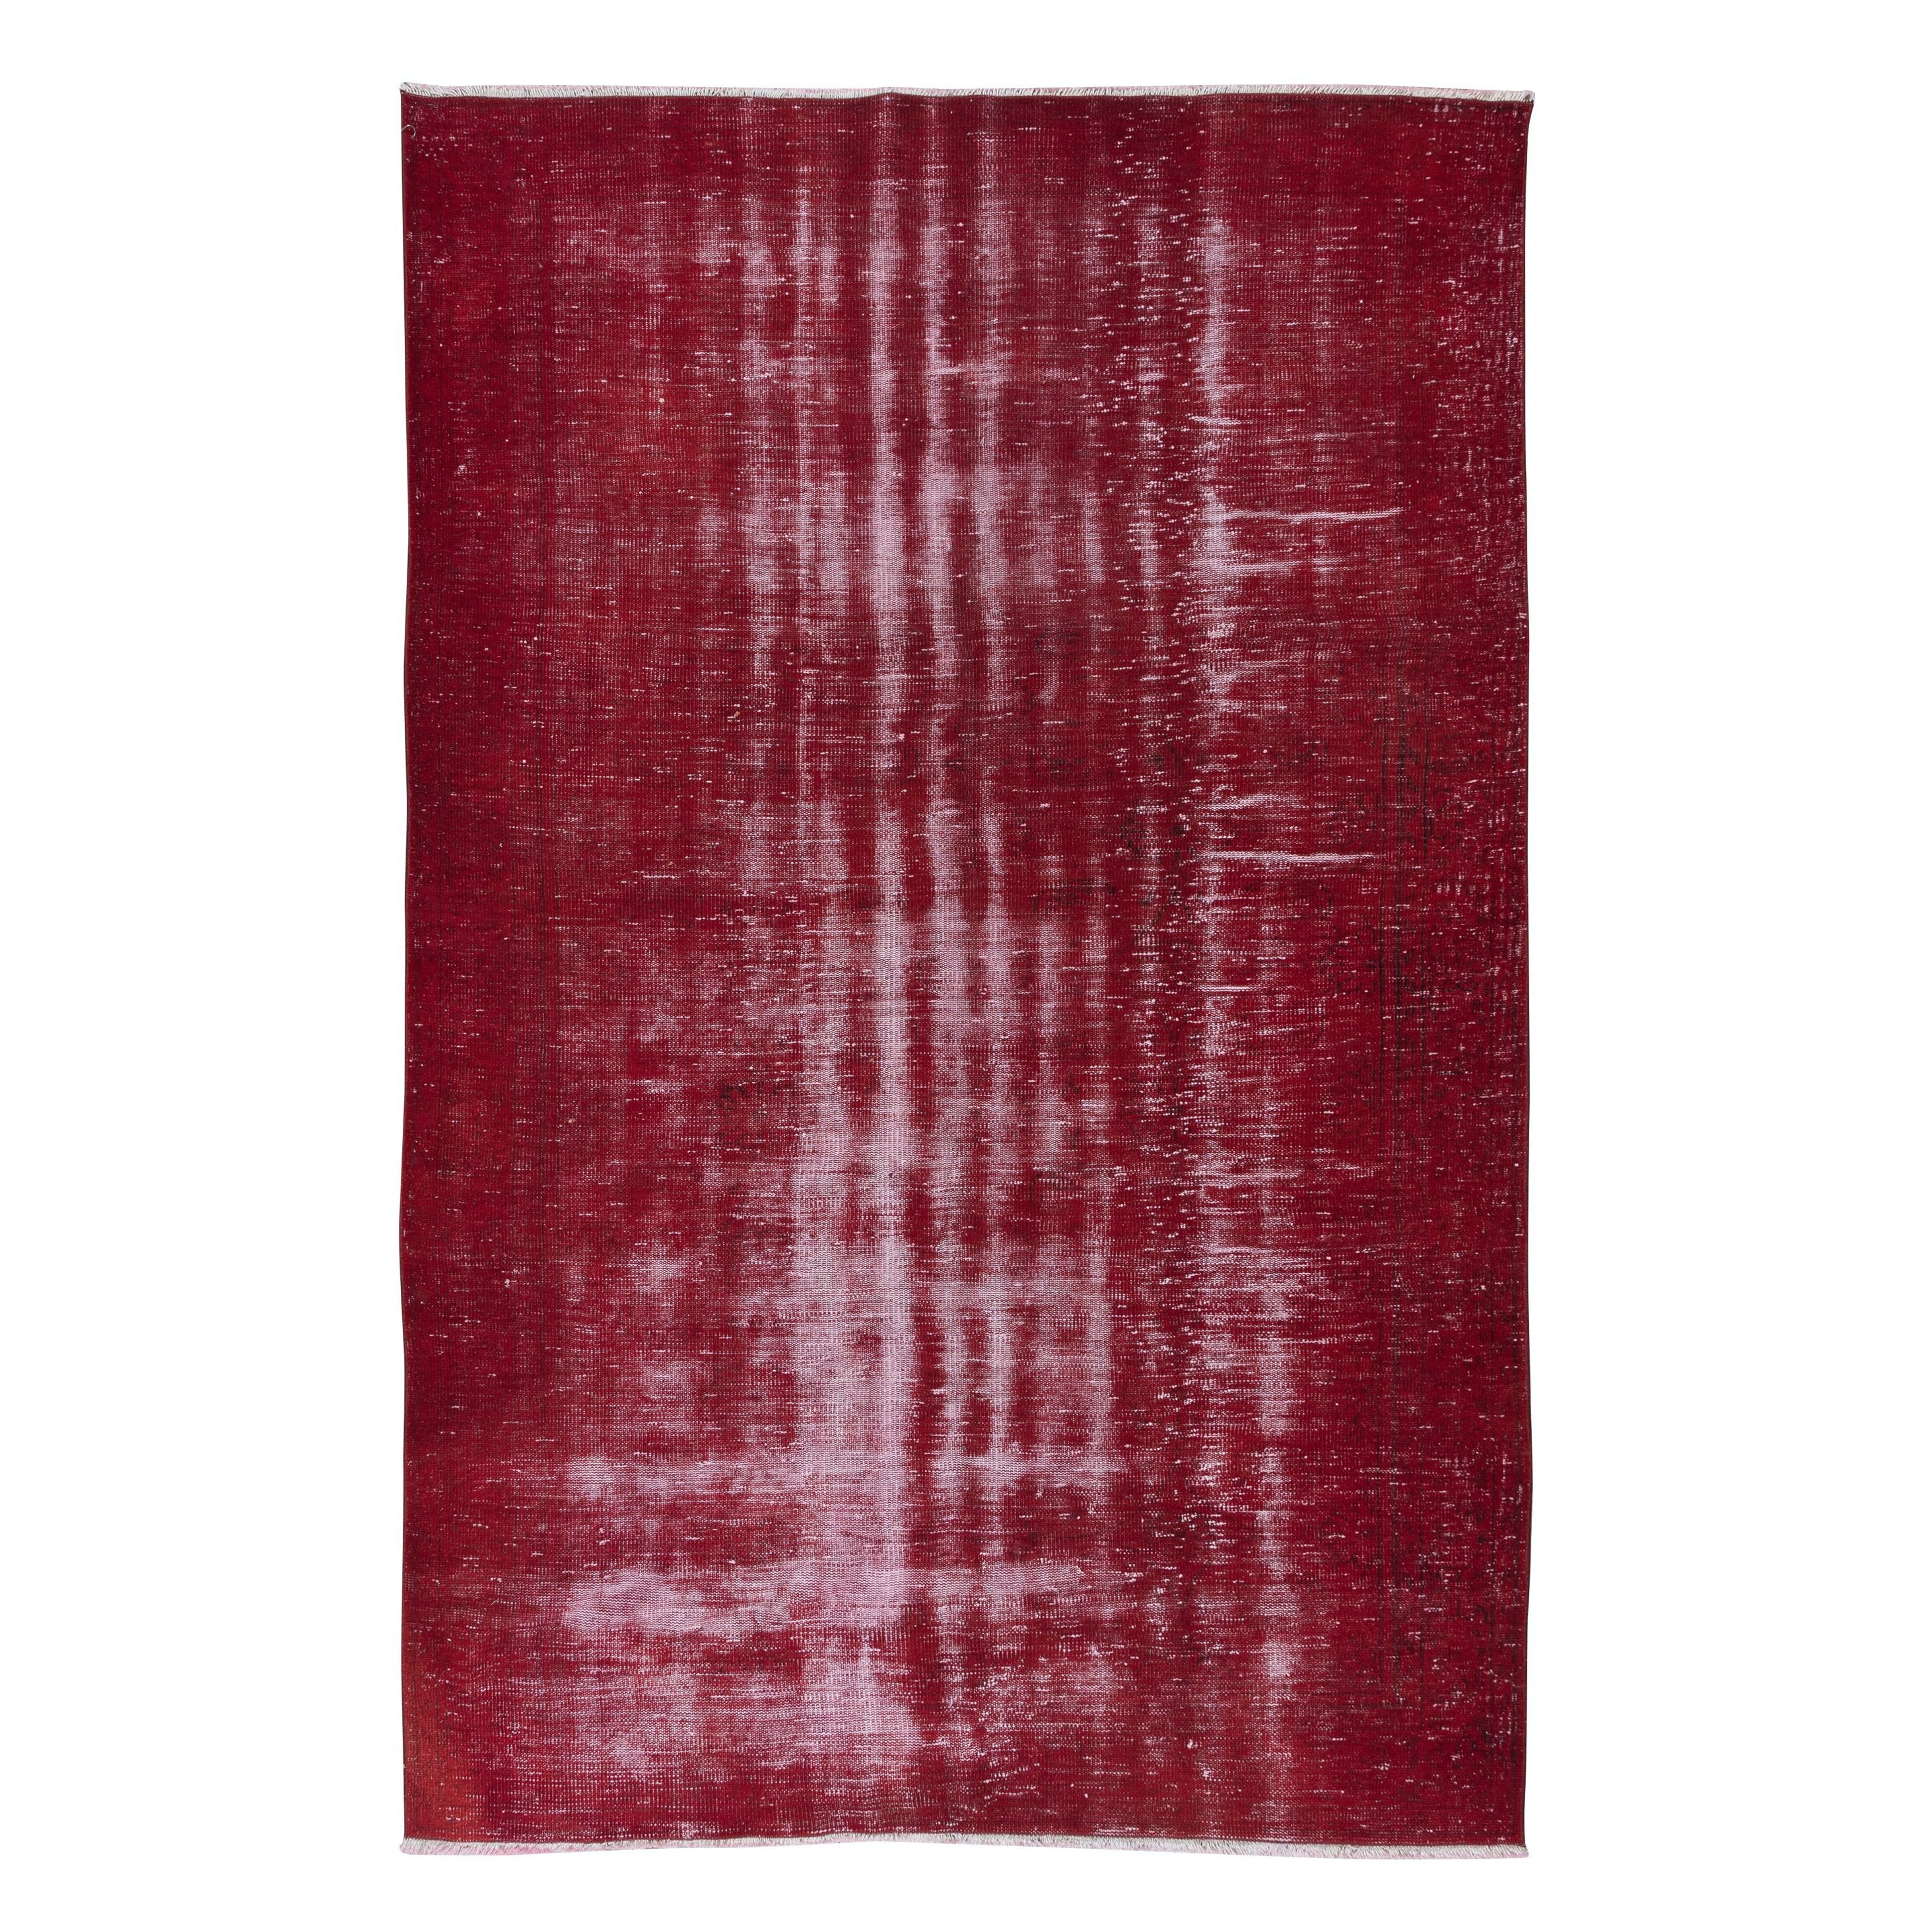 6x9.2 Ft Shabby Chic Modern Turkish Wool Red Rug, Handmade Distressed Old Carpet